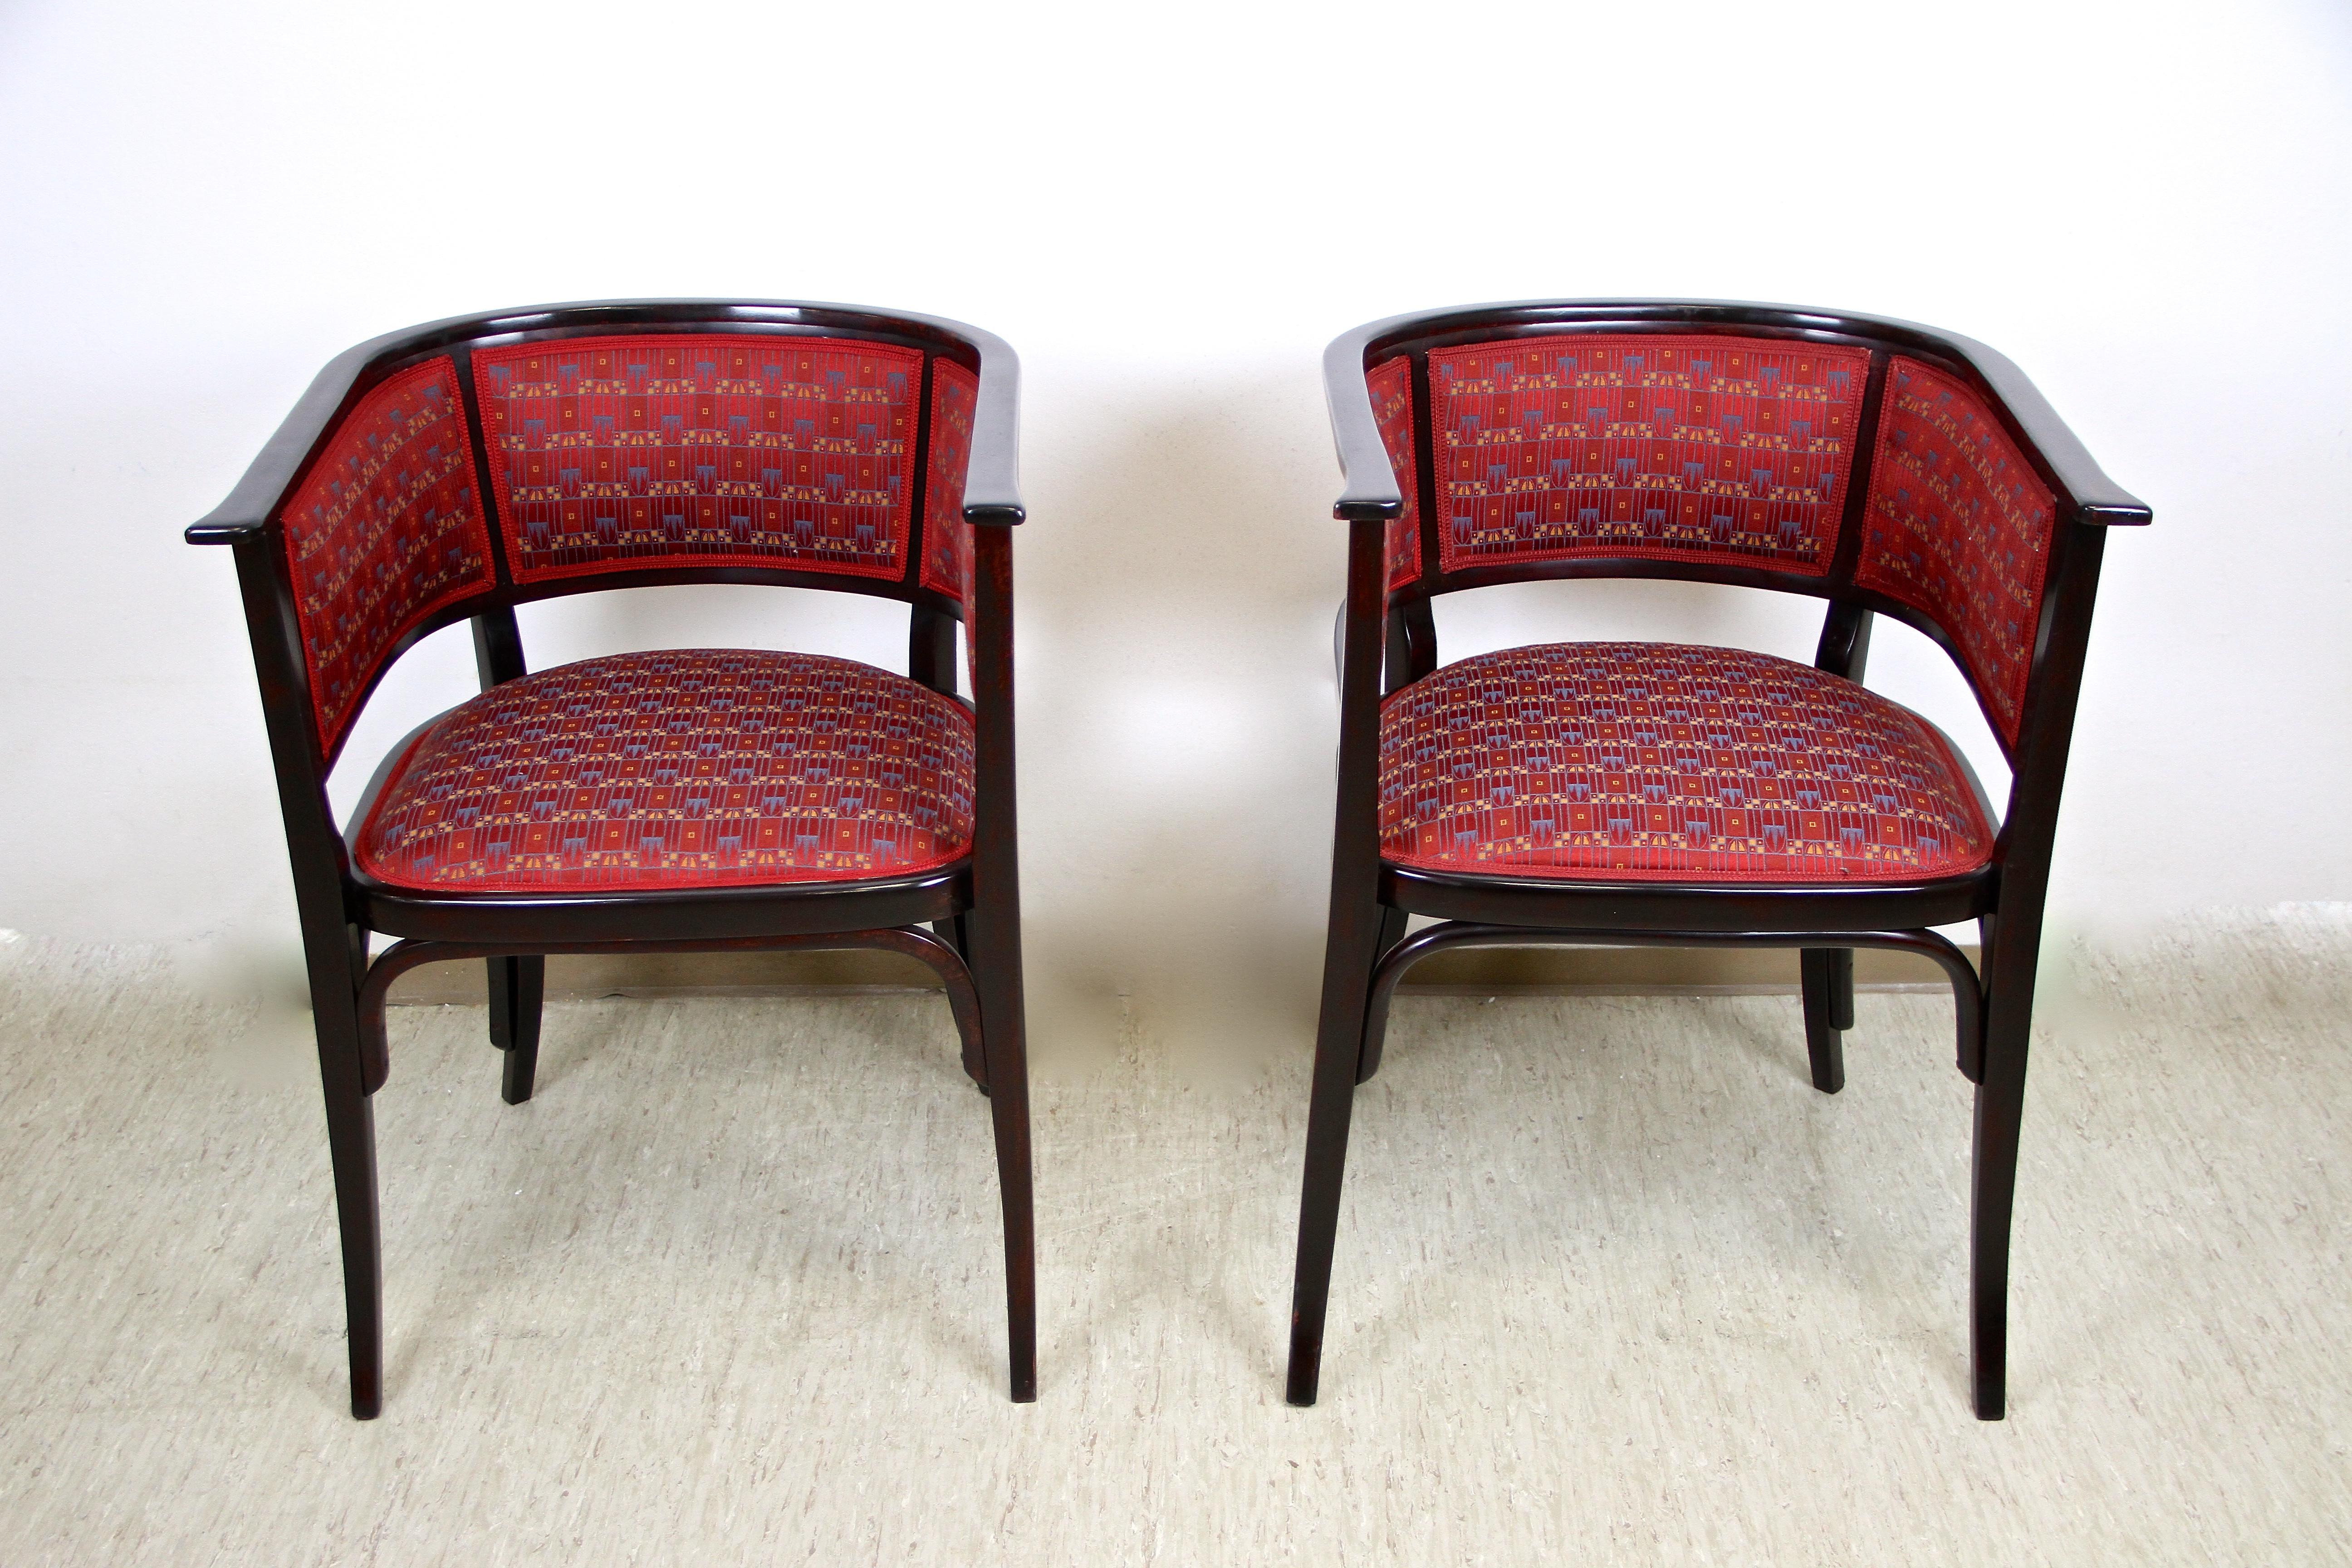 Art Nouveau Thonet Bentwood Seating Set with Two Armchairs and Bench, Austria, circa 1910